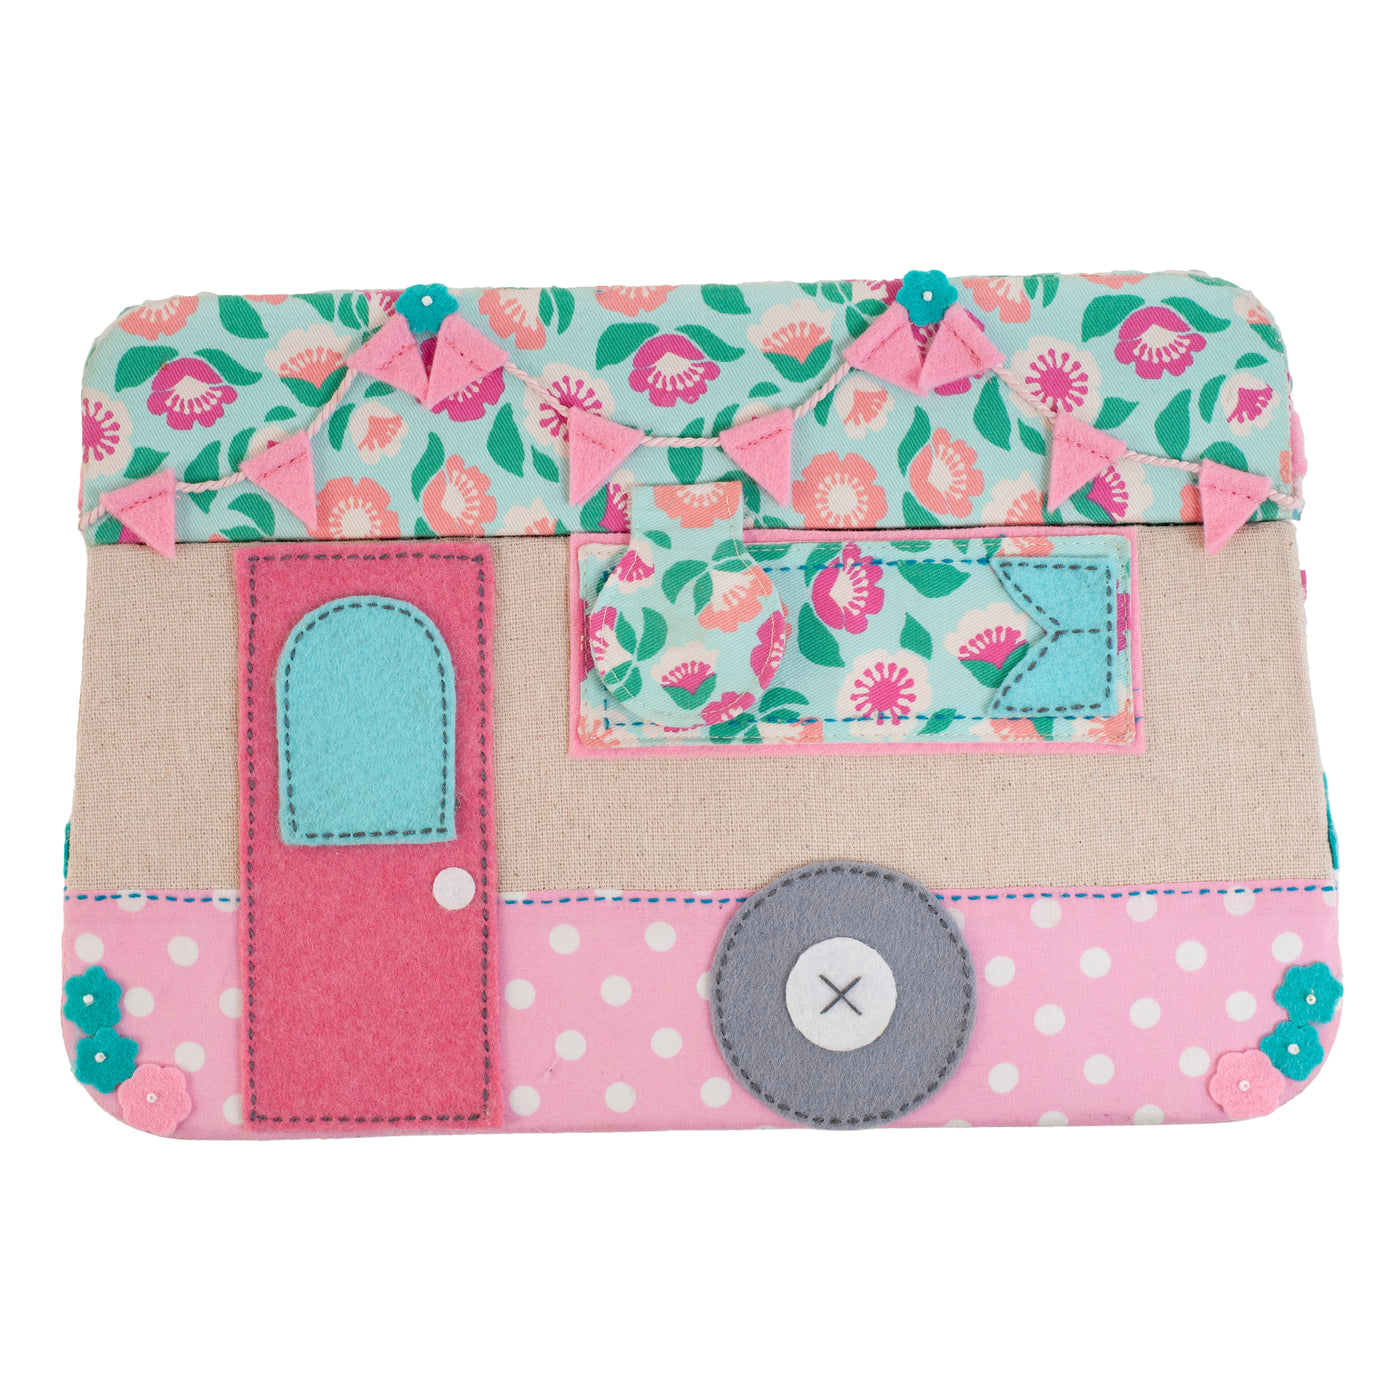 Novelty Caravan sewing box (20.5 x 31 x 16cm.). With lift out compartment.